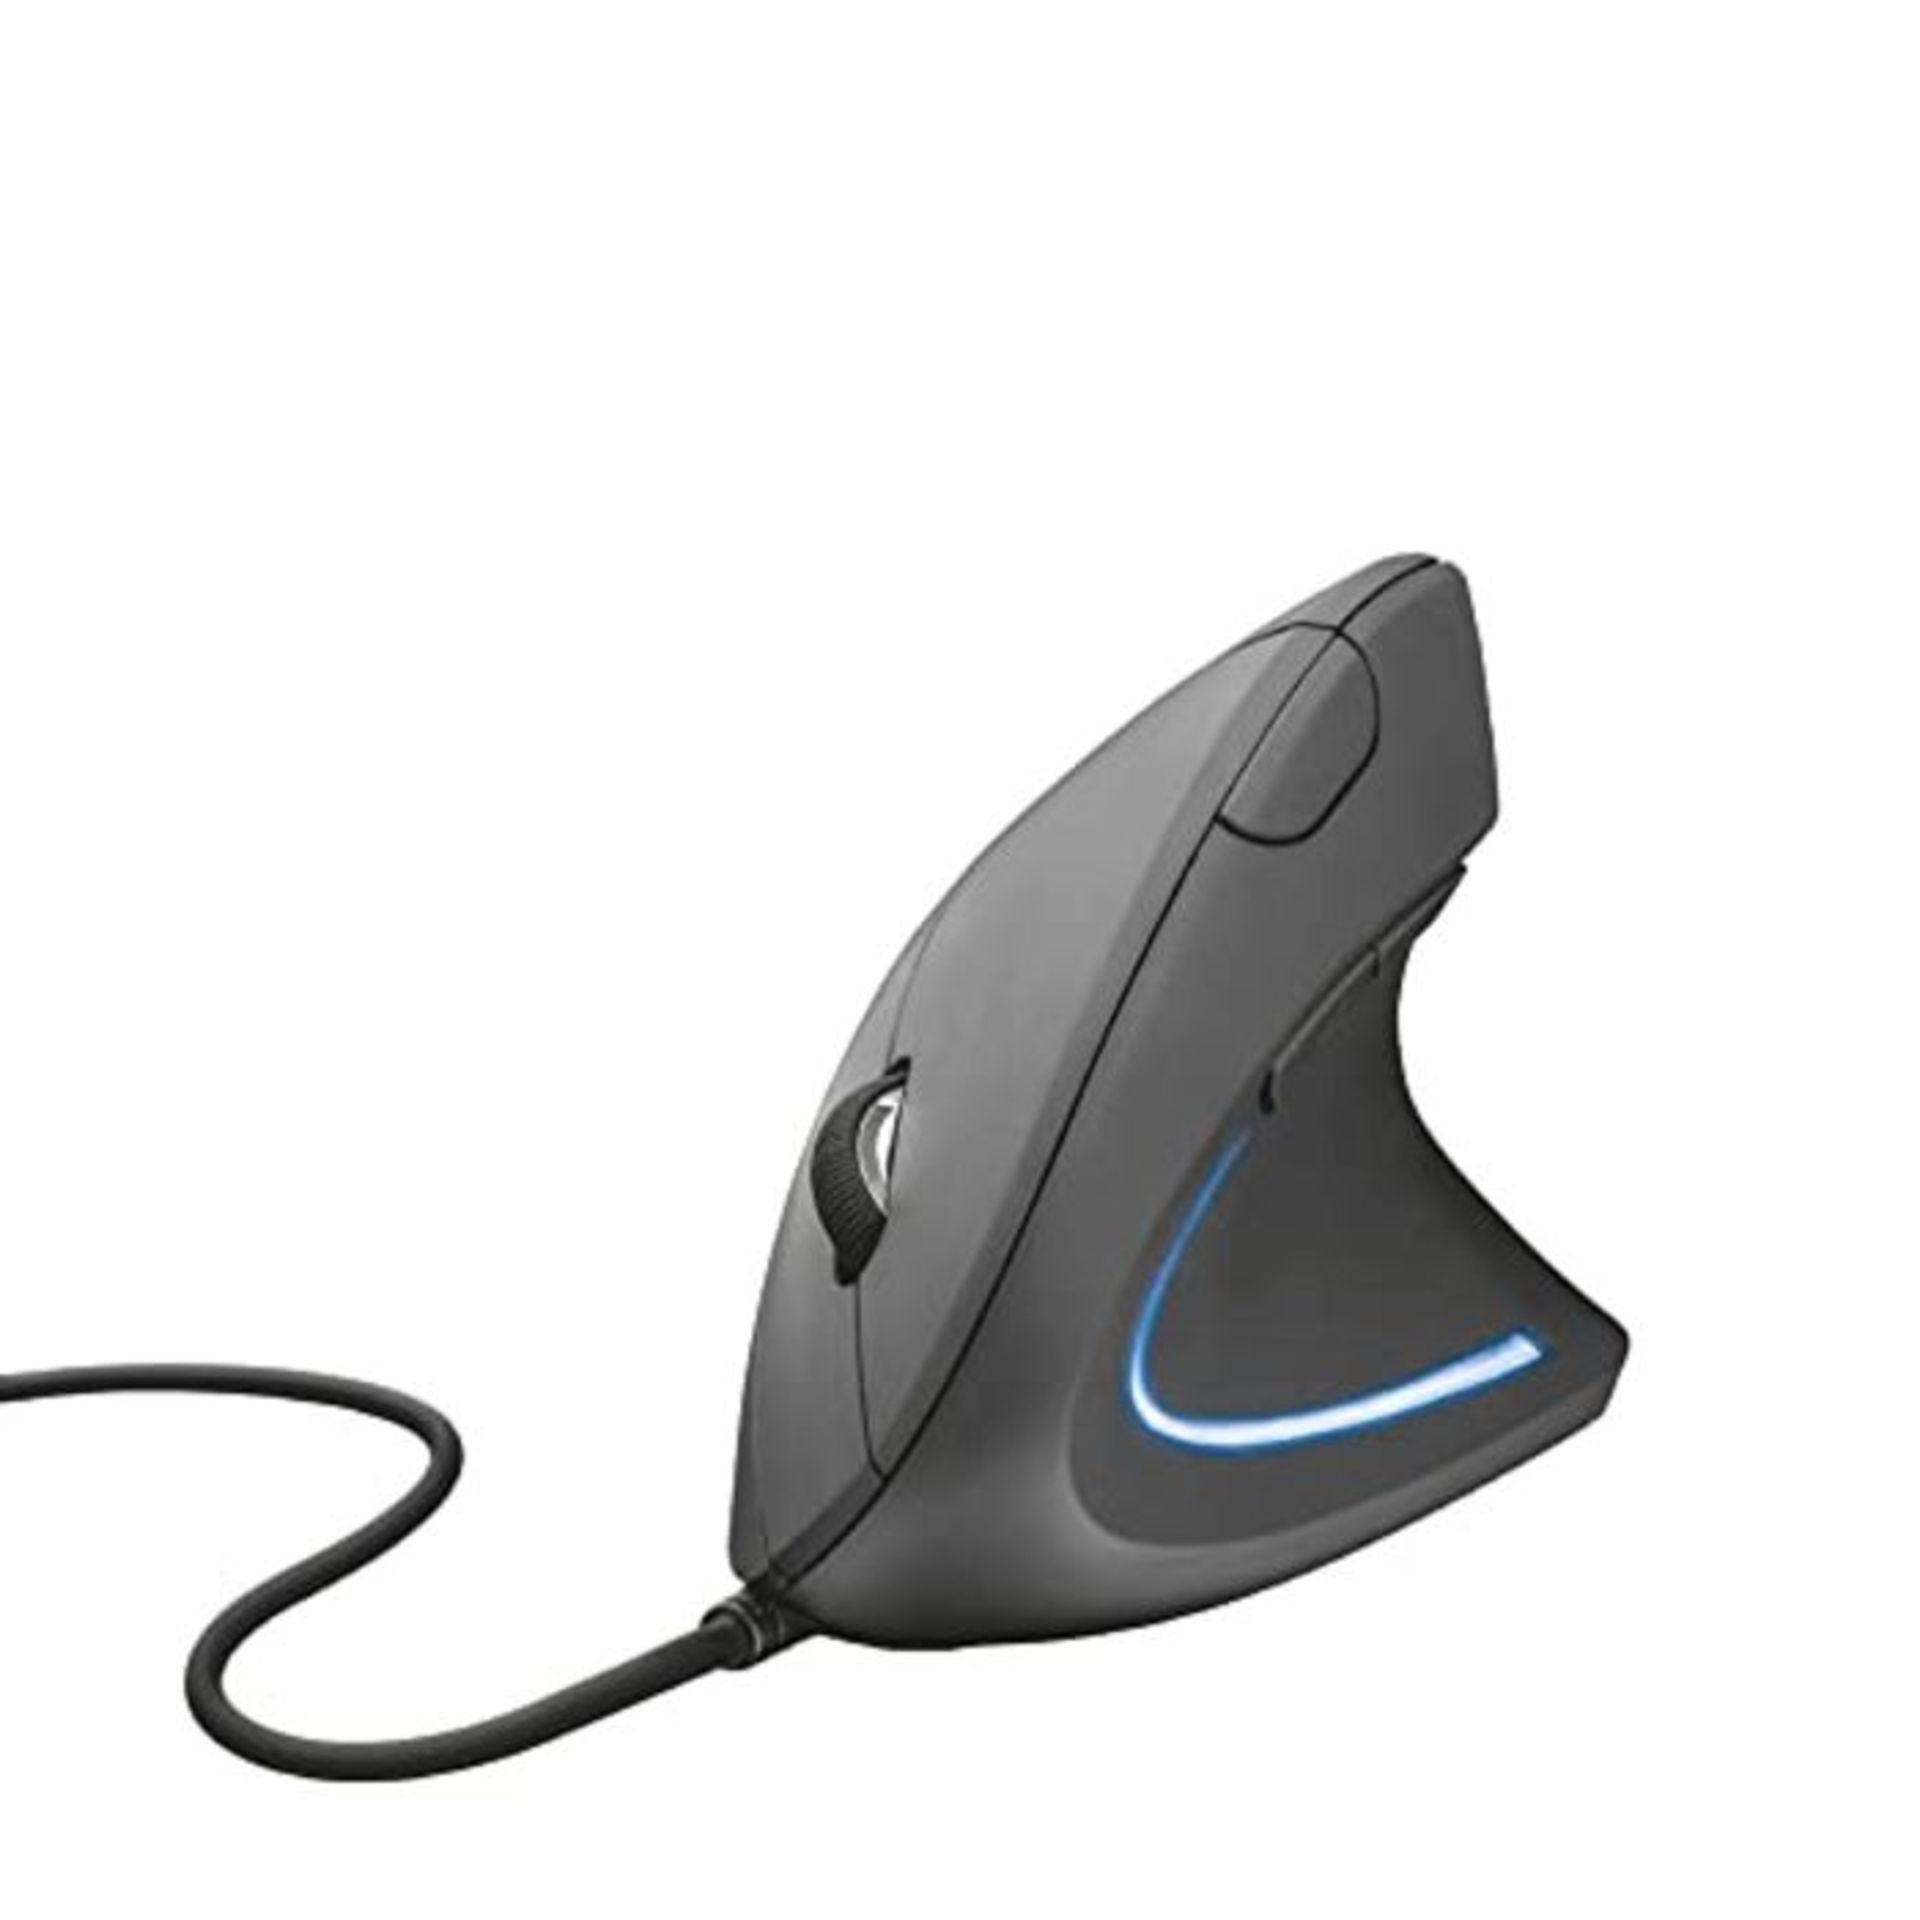 Trust Verto Wired Ergonomic Mouse, Vertical Mouse with LED Illumination, 1000-1600 DPI